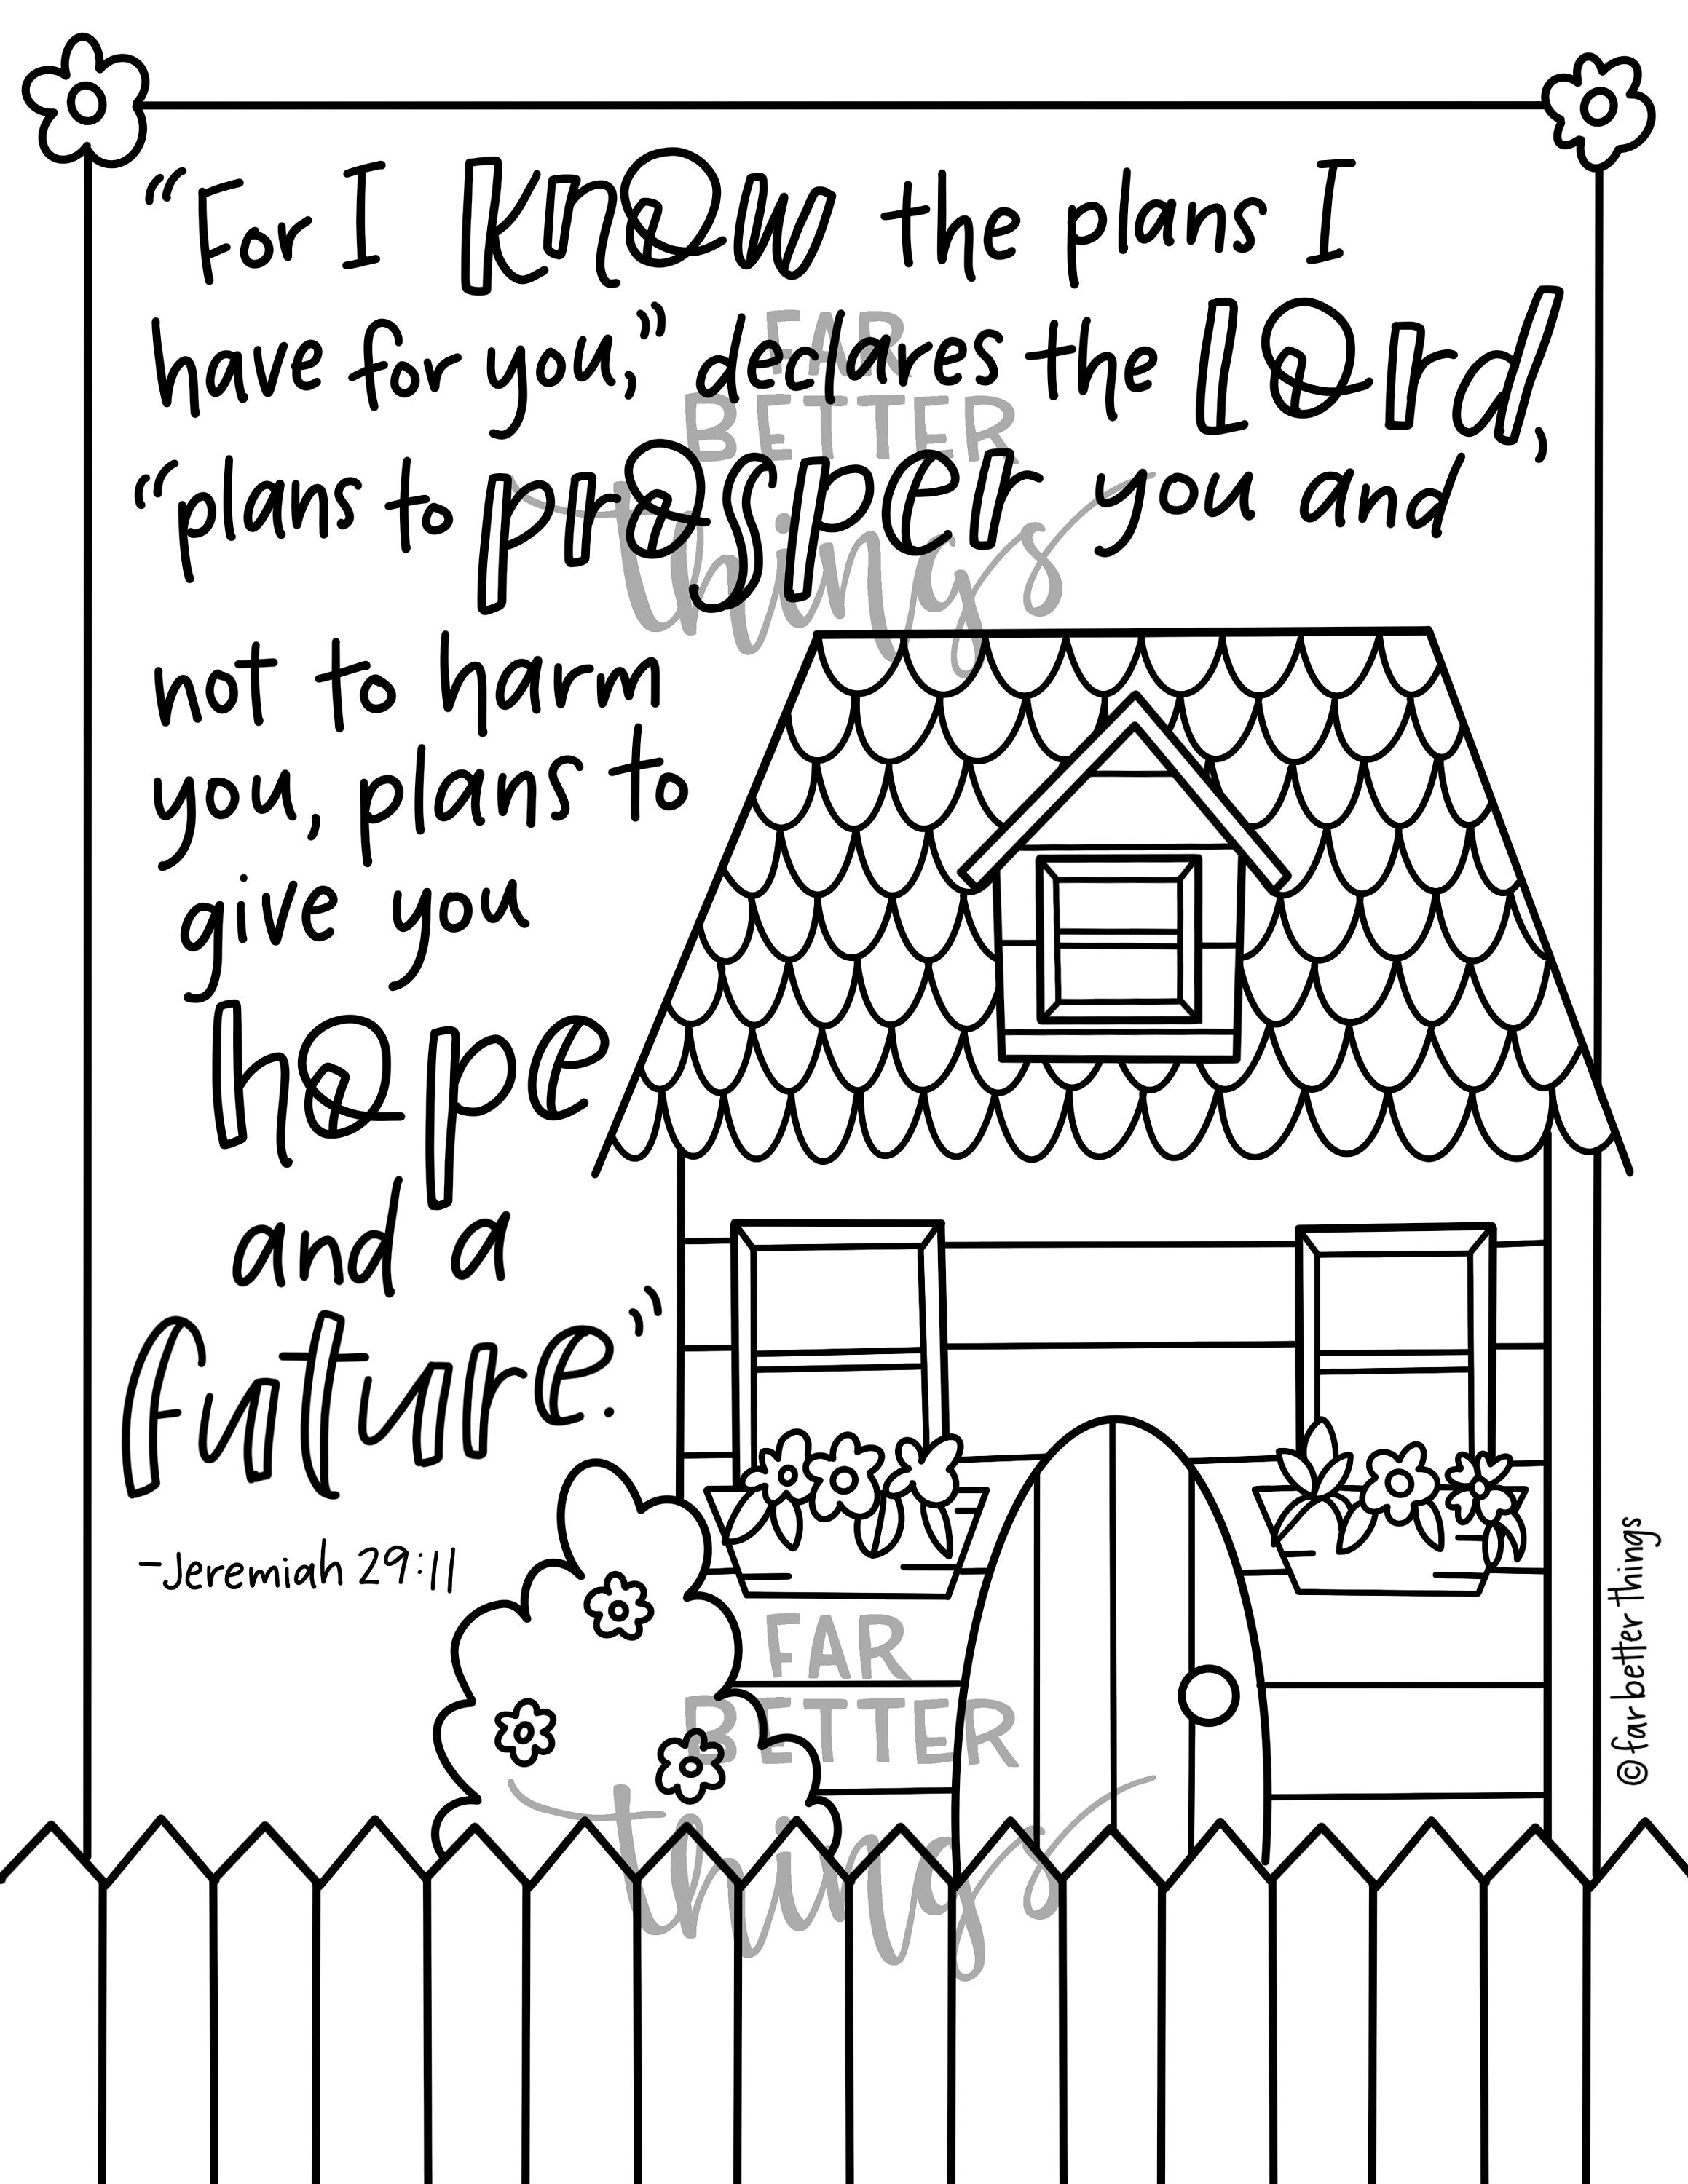 Bible verse coloring page jeremiah printable coloring page bible coloring page christian kids activity sunday school activity download now